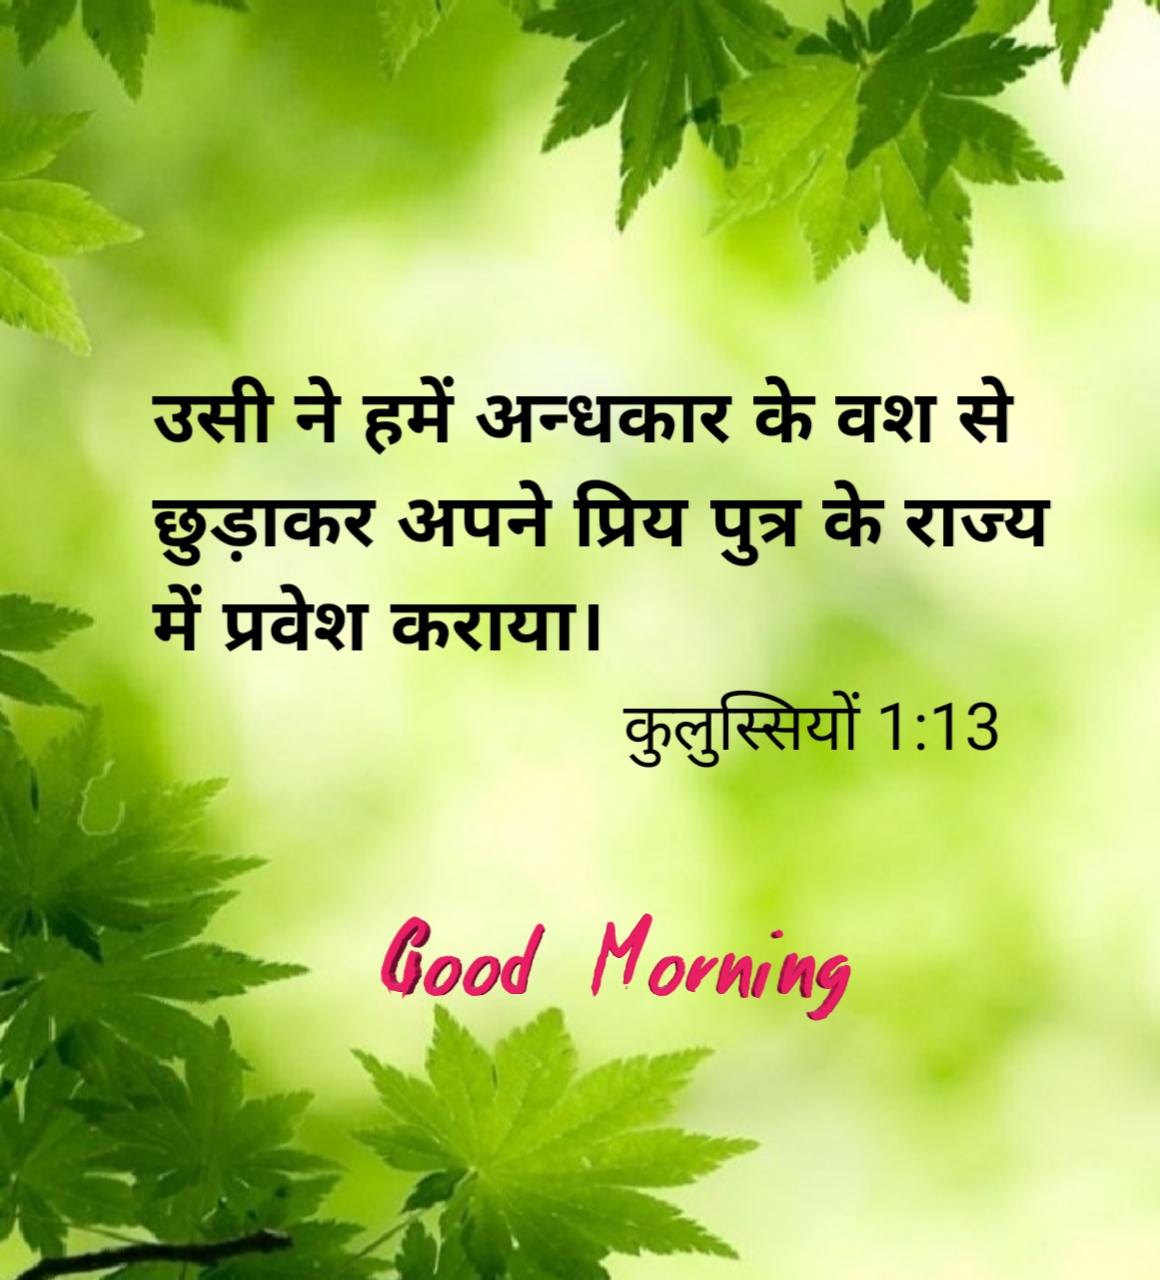 हिन्दी बाइबल वचन । Good Morning Bible Quotes images wallpaper photo download